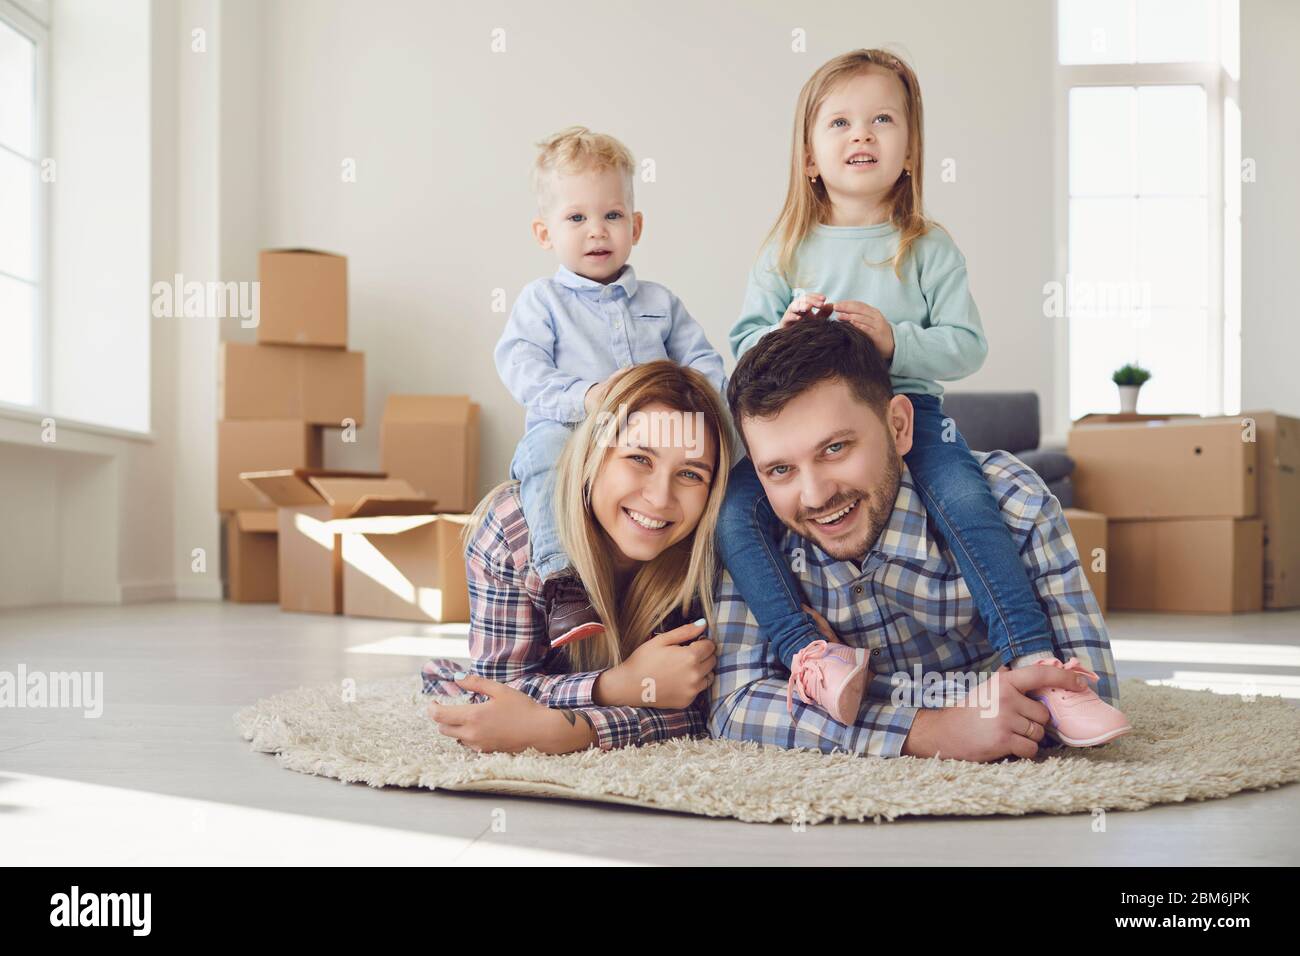 Happy family smiling at a new house moving. Stock Photo